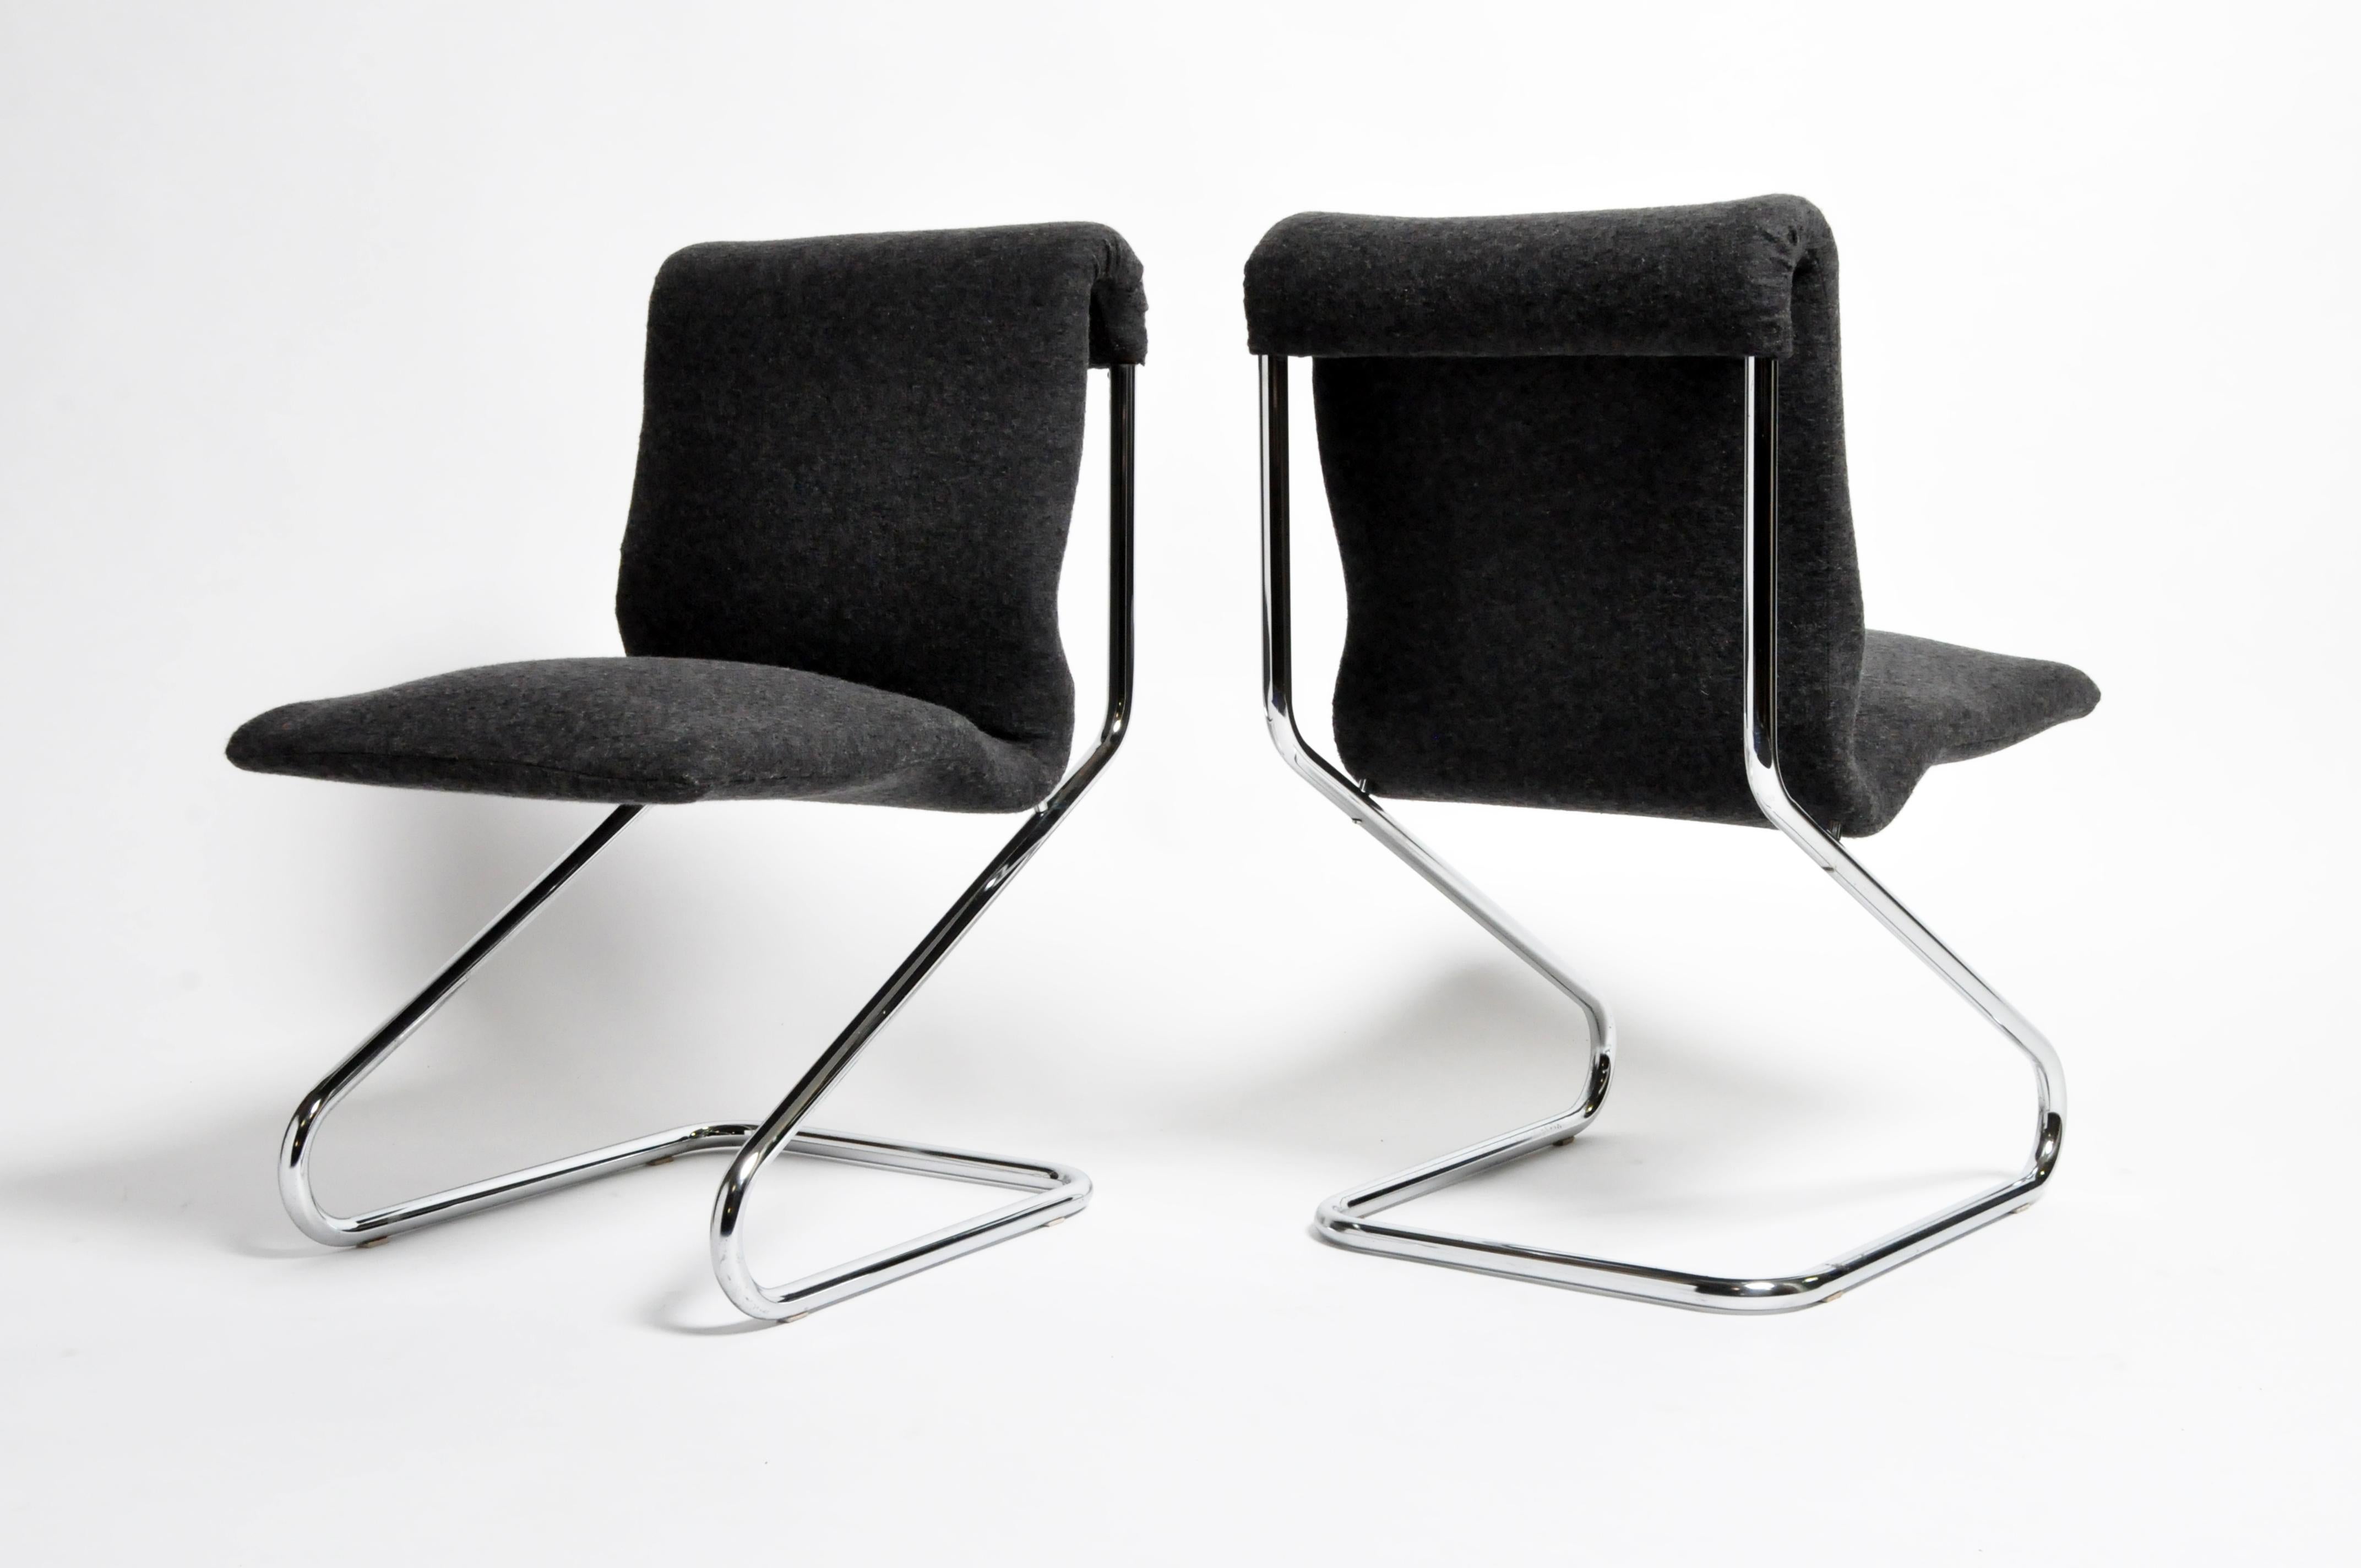 These stylish chrome chairs exemplify the spirit of French post-war modernism. They are sleekly comfortable and have meticulously reupholstered in 100% wool. Paris, 1960's. Price is for each chair.